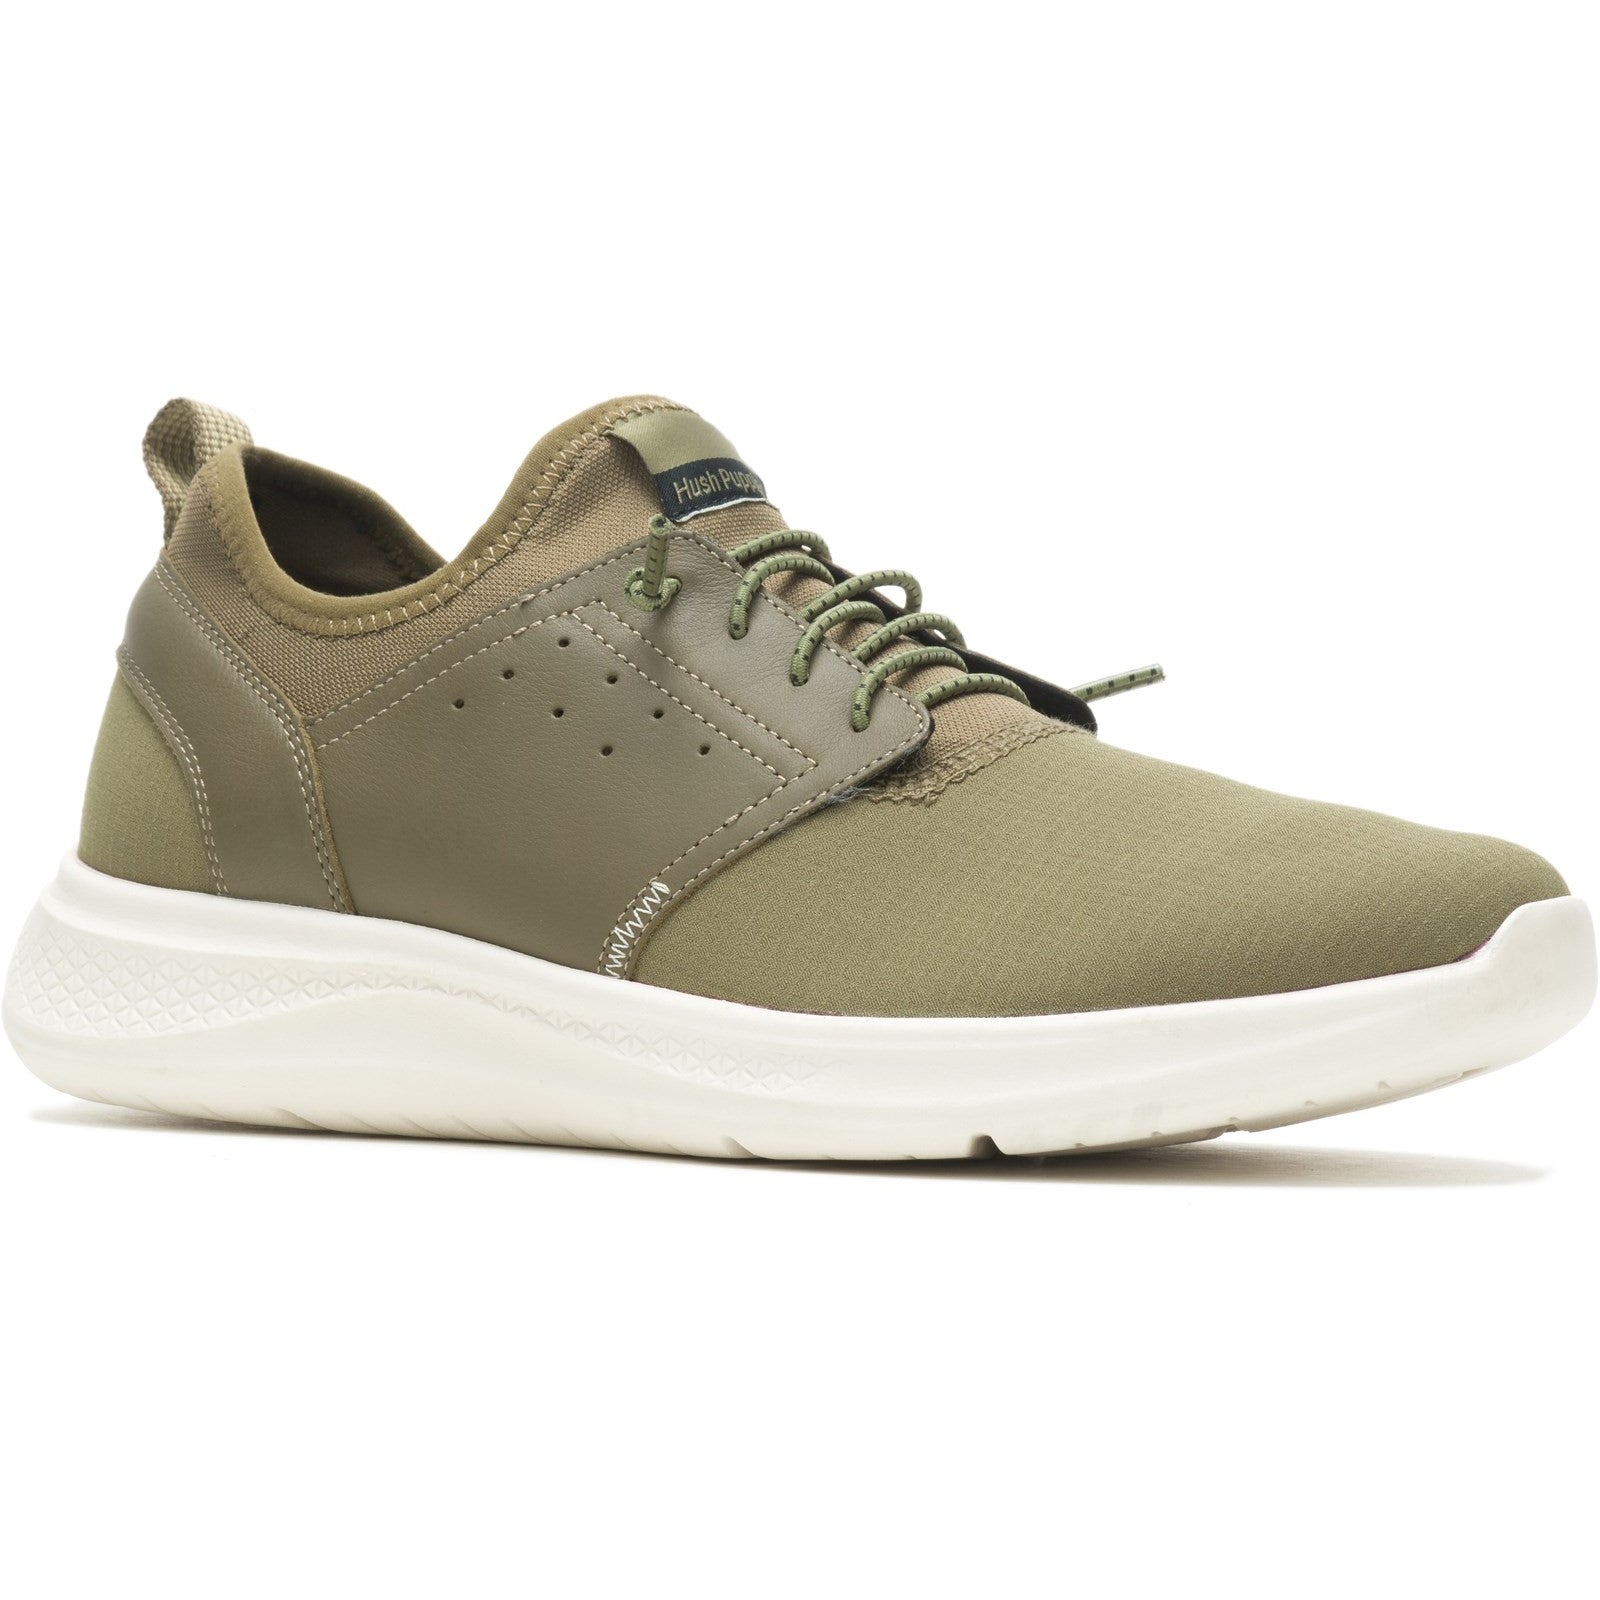 Mens Sports Olive Hush Puppies Elevate Bungee